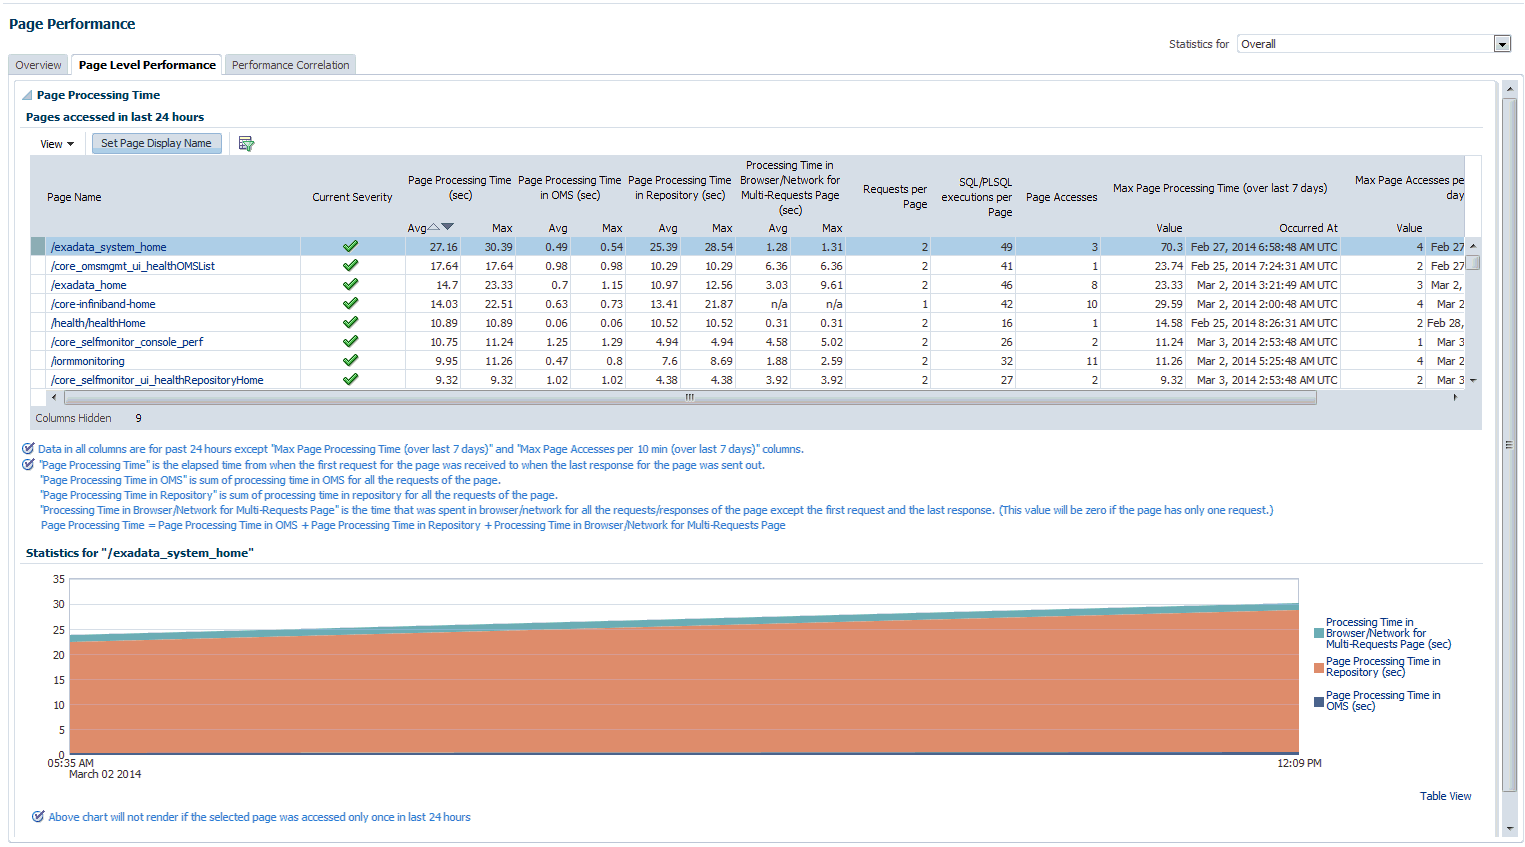 Page level performance